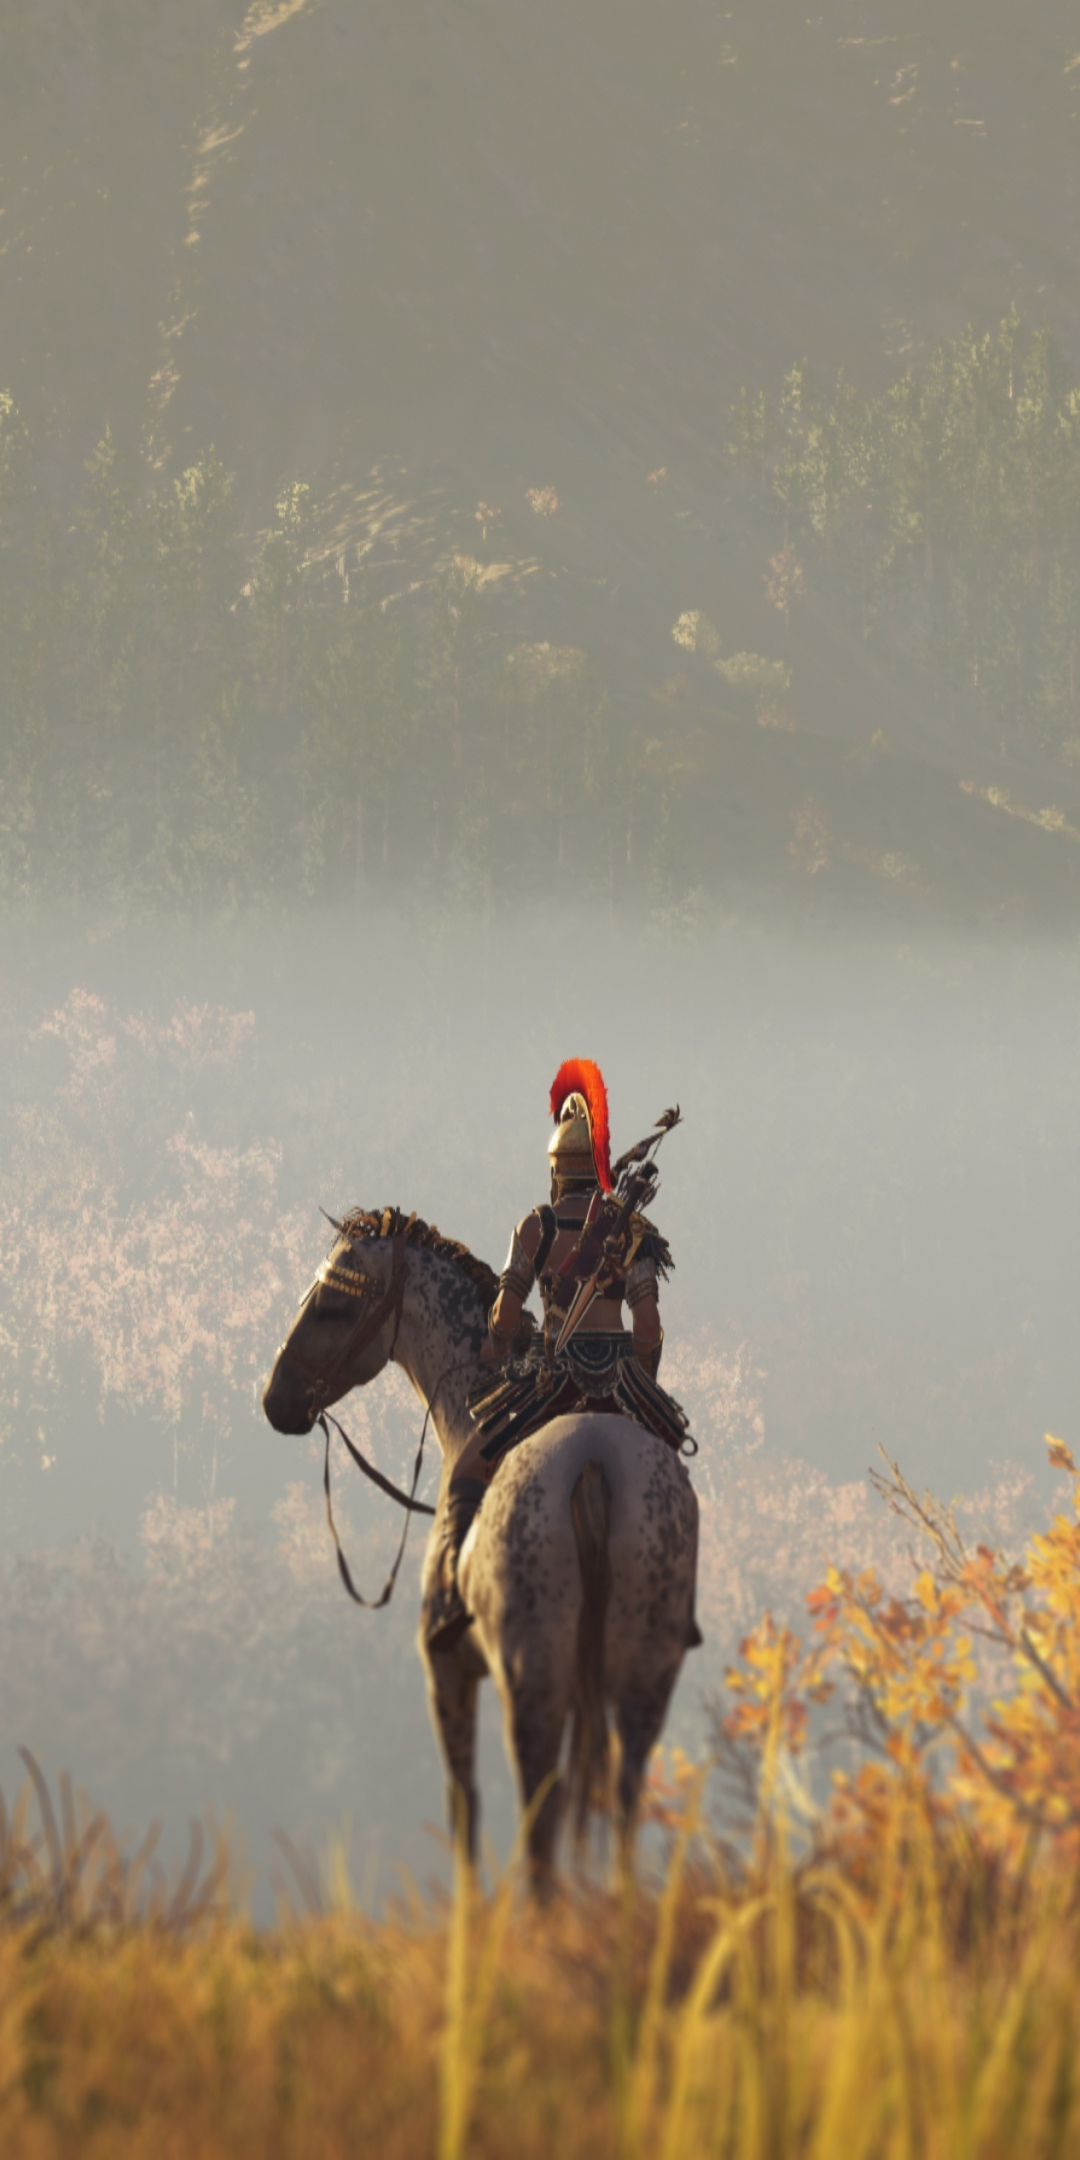 2018, video game, Assassin's Creed Odyssey, horse ride, 1080x2160 wallpaper